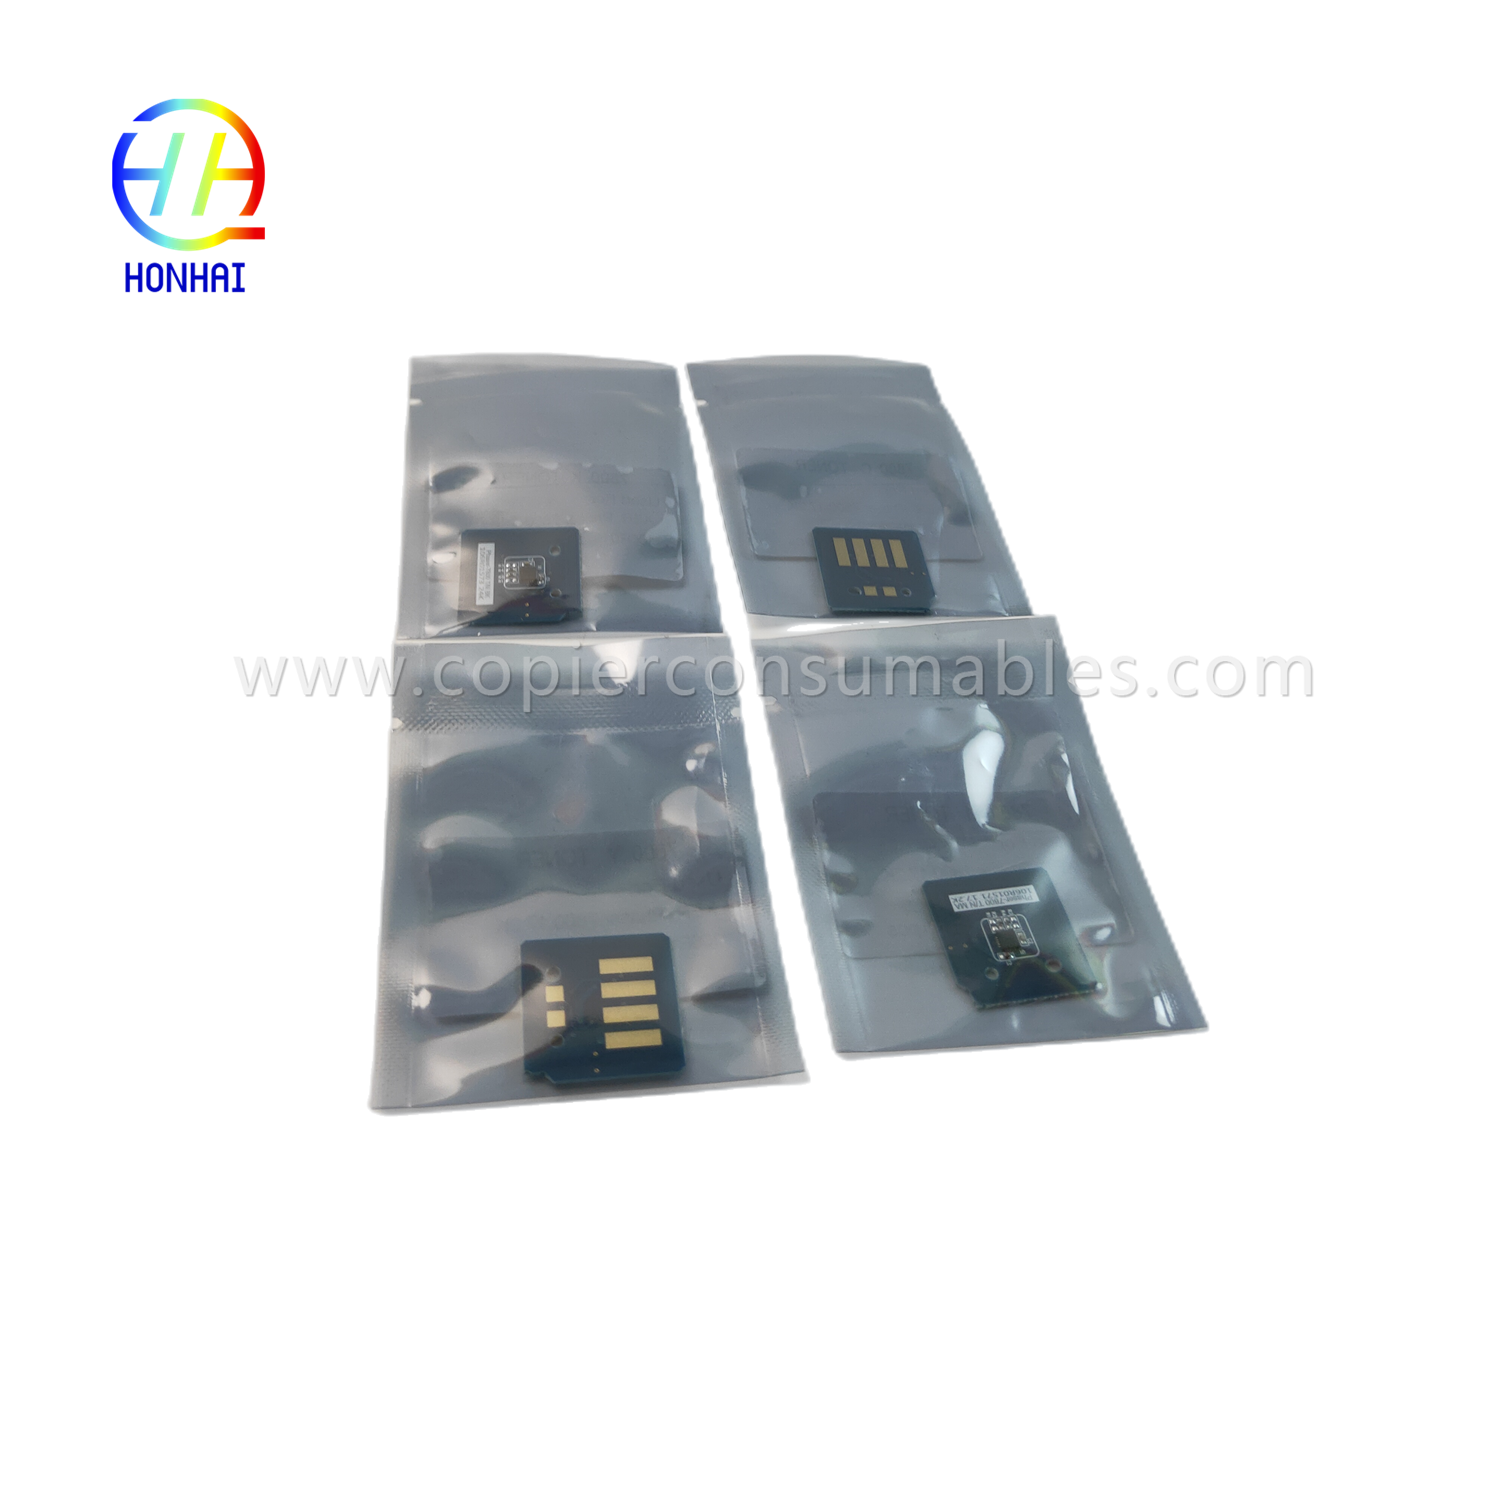 https://c585.goodao.net/toner-chip-set-for-xerox-phaser-7800-106r01573-106r01570-106r01571-106r01572-chip-2-product/